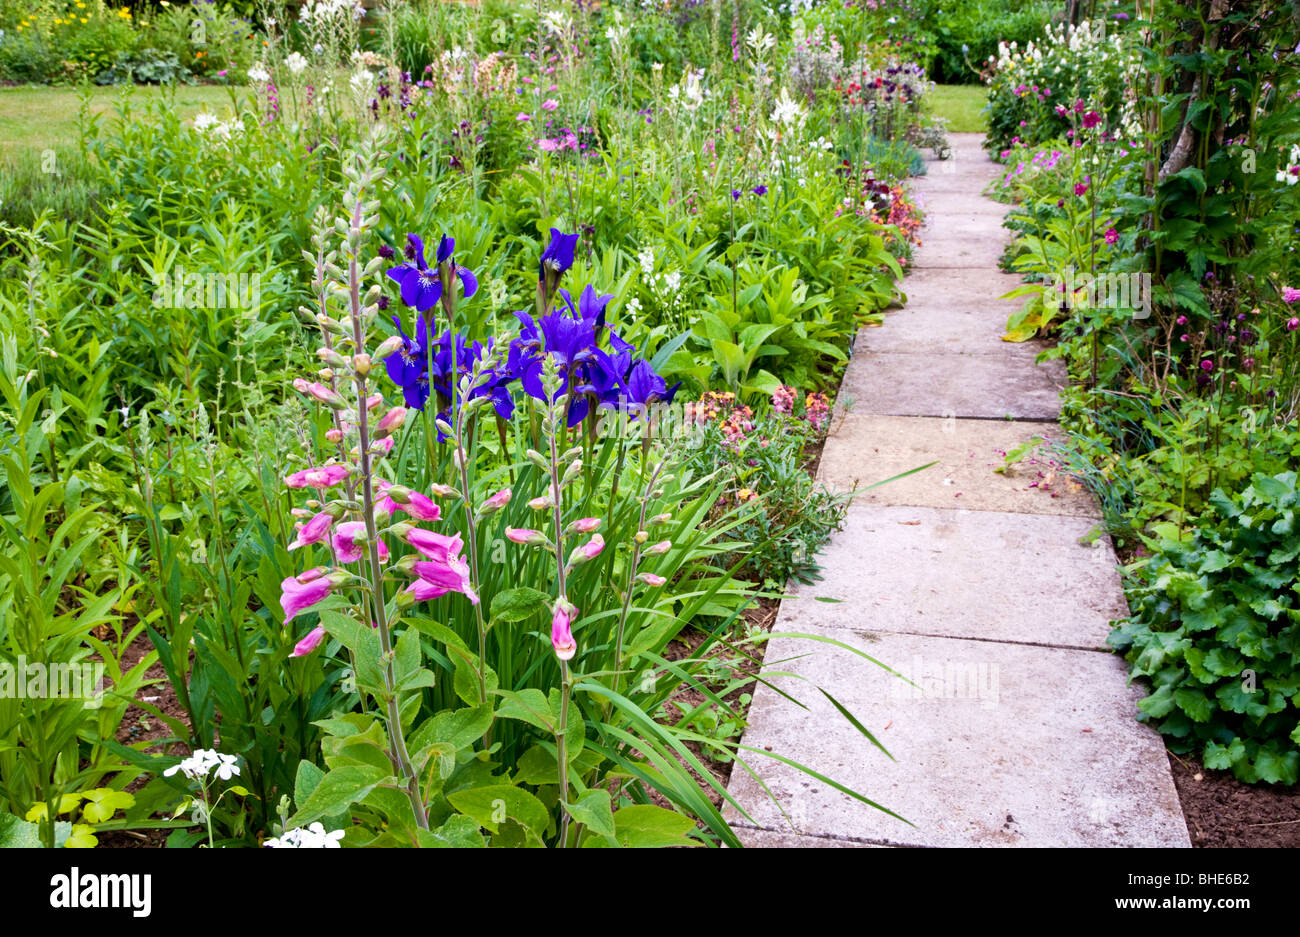 Irises and foxgloves along a paved path in an English country or town, suburban gardem in late May Stock Photo